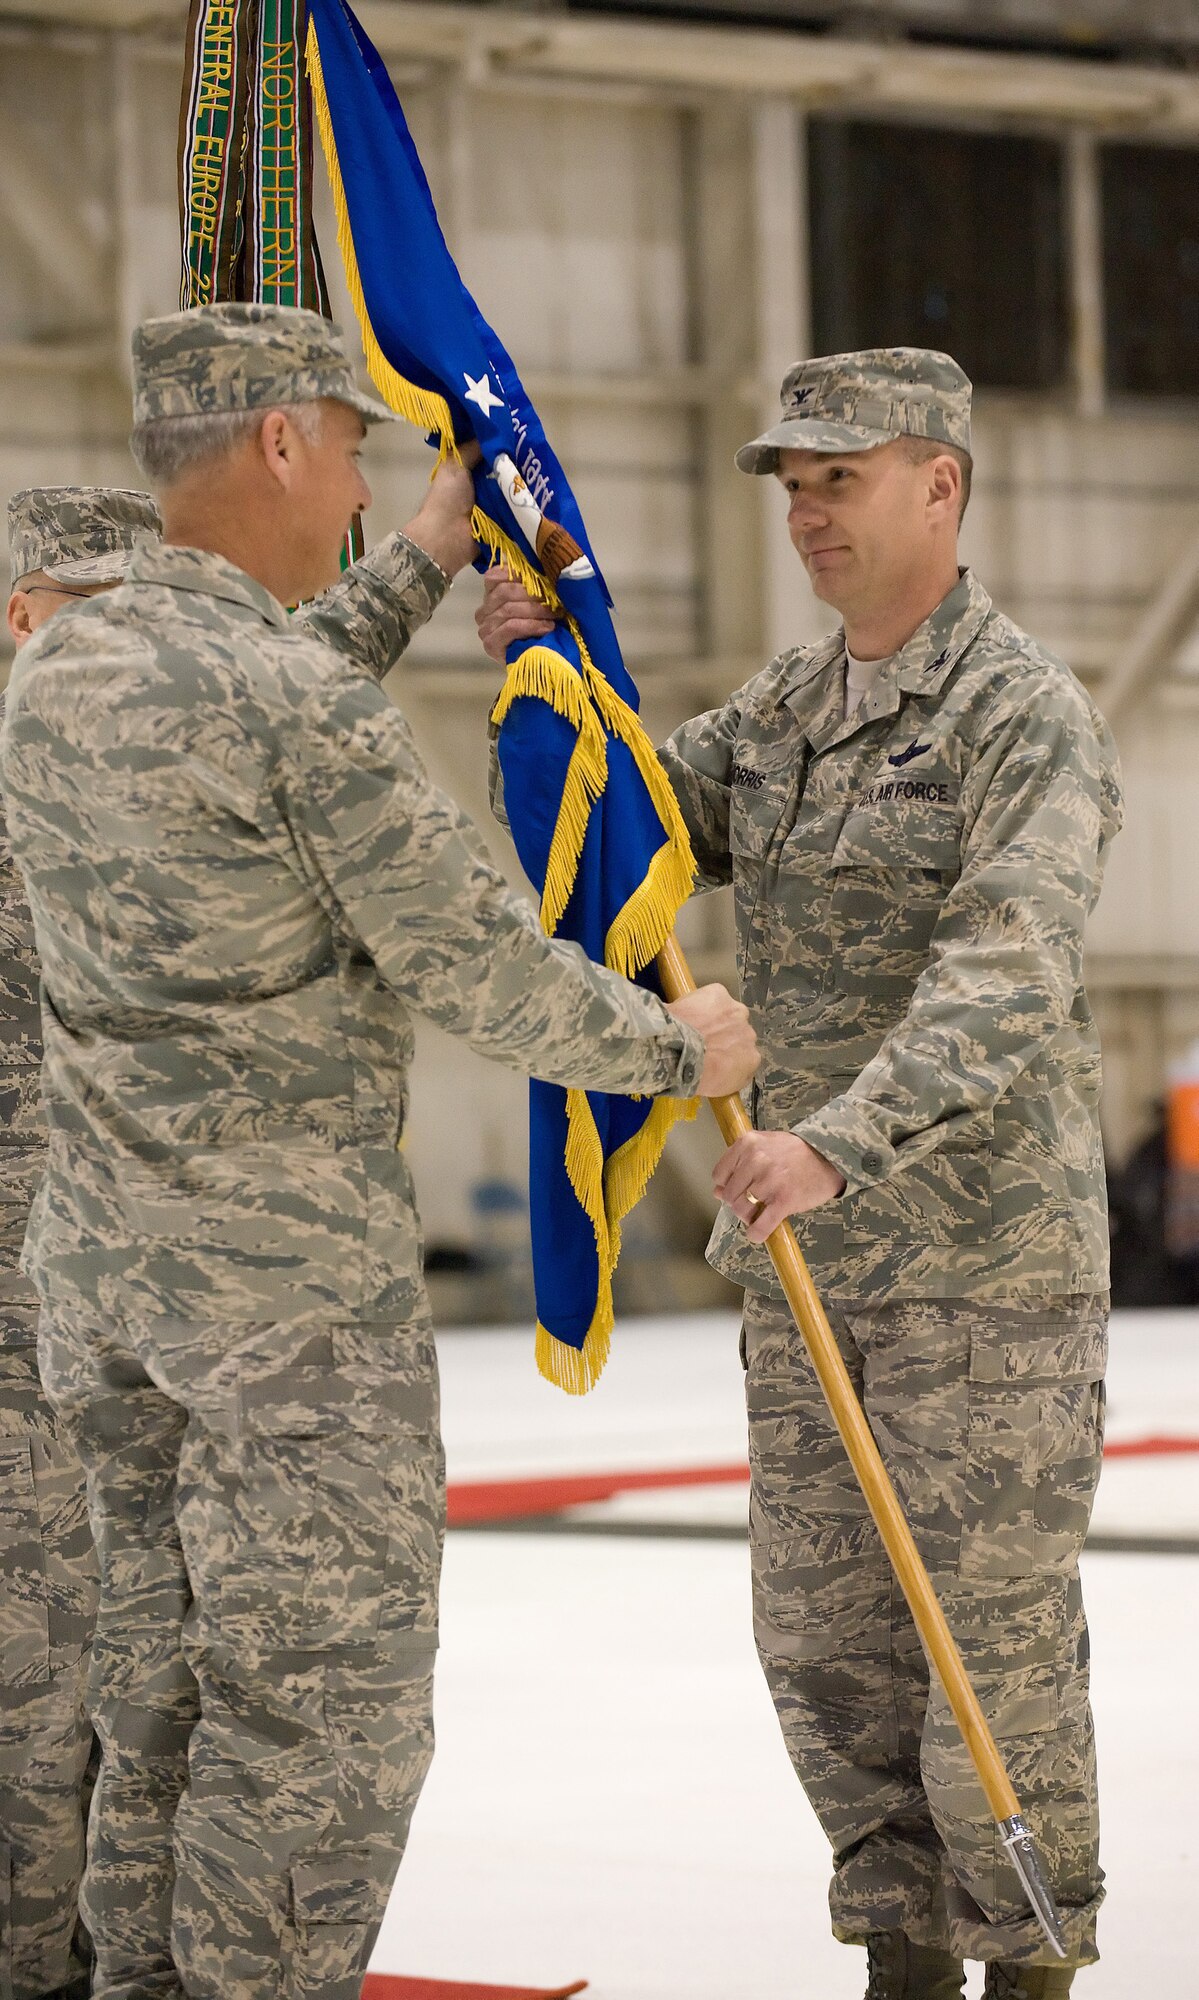 Col. Manson O. Morris, 436th Airlift wing commander, accepts the 436th AW guidon and command of the Eagle Wing from Maj. Gen. Winfield W. Scott III, 18th Air Force commander, during a change-of-command ceremony Jan. 9. Colonel Morris assumed command from Col. Steven B. Harrison, who will become the commander of the 89th Airlift Wing, Andrews Air Force Base, Md.  (U.S. Air Force photo/Jason Minto)